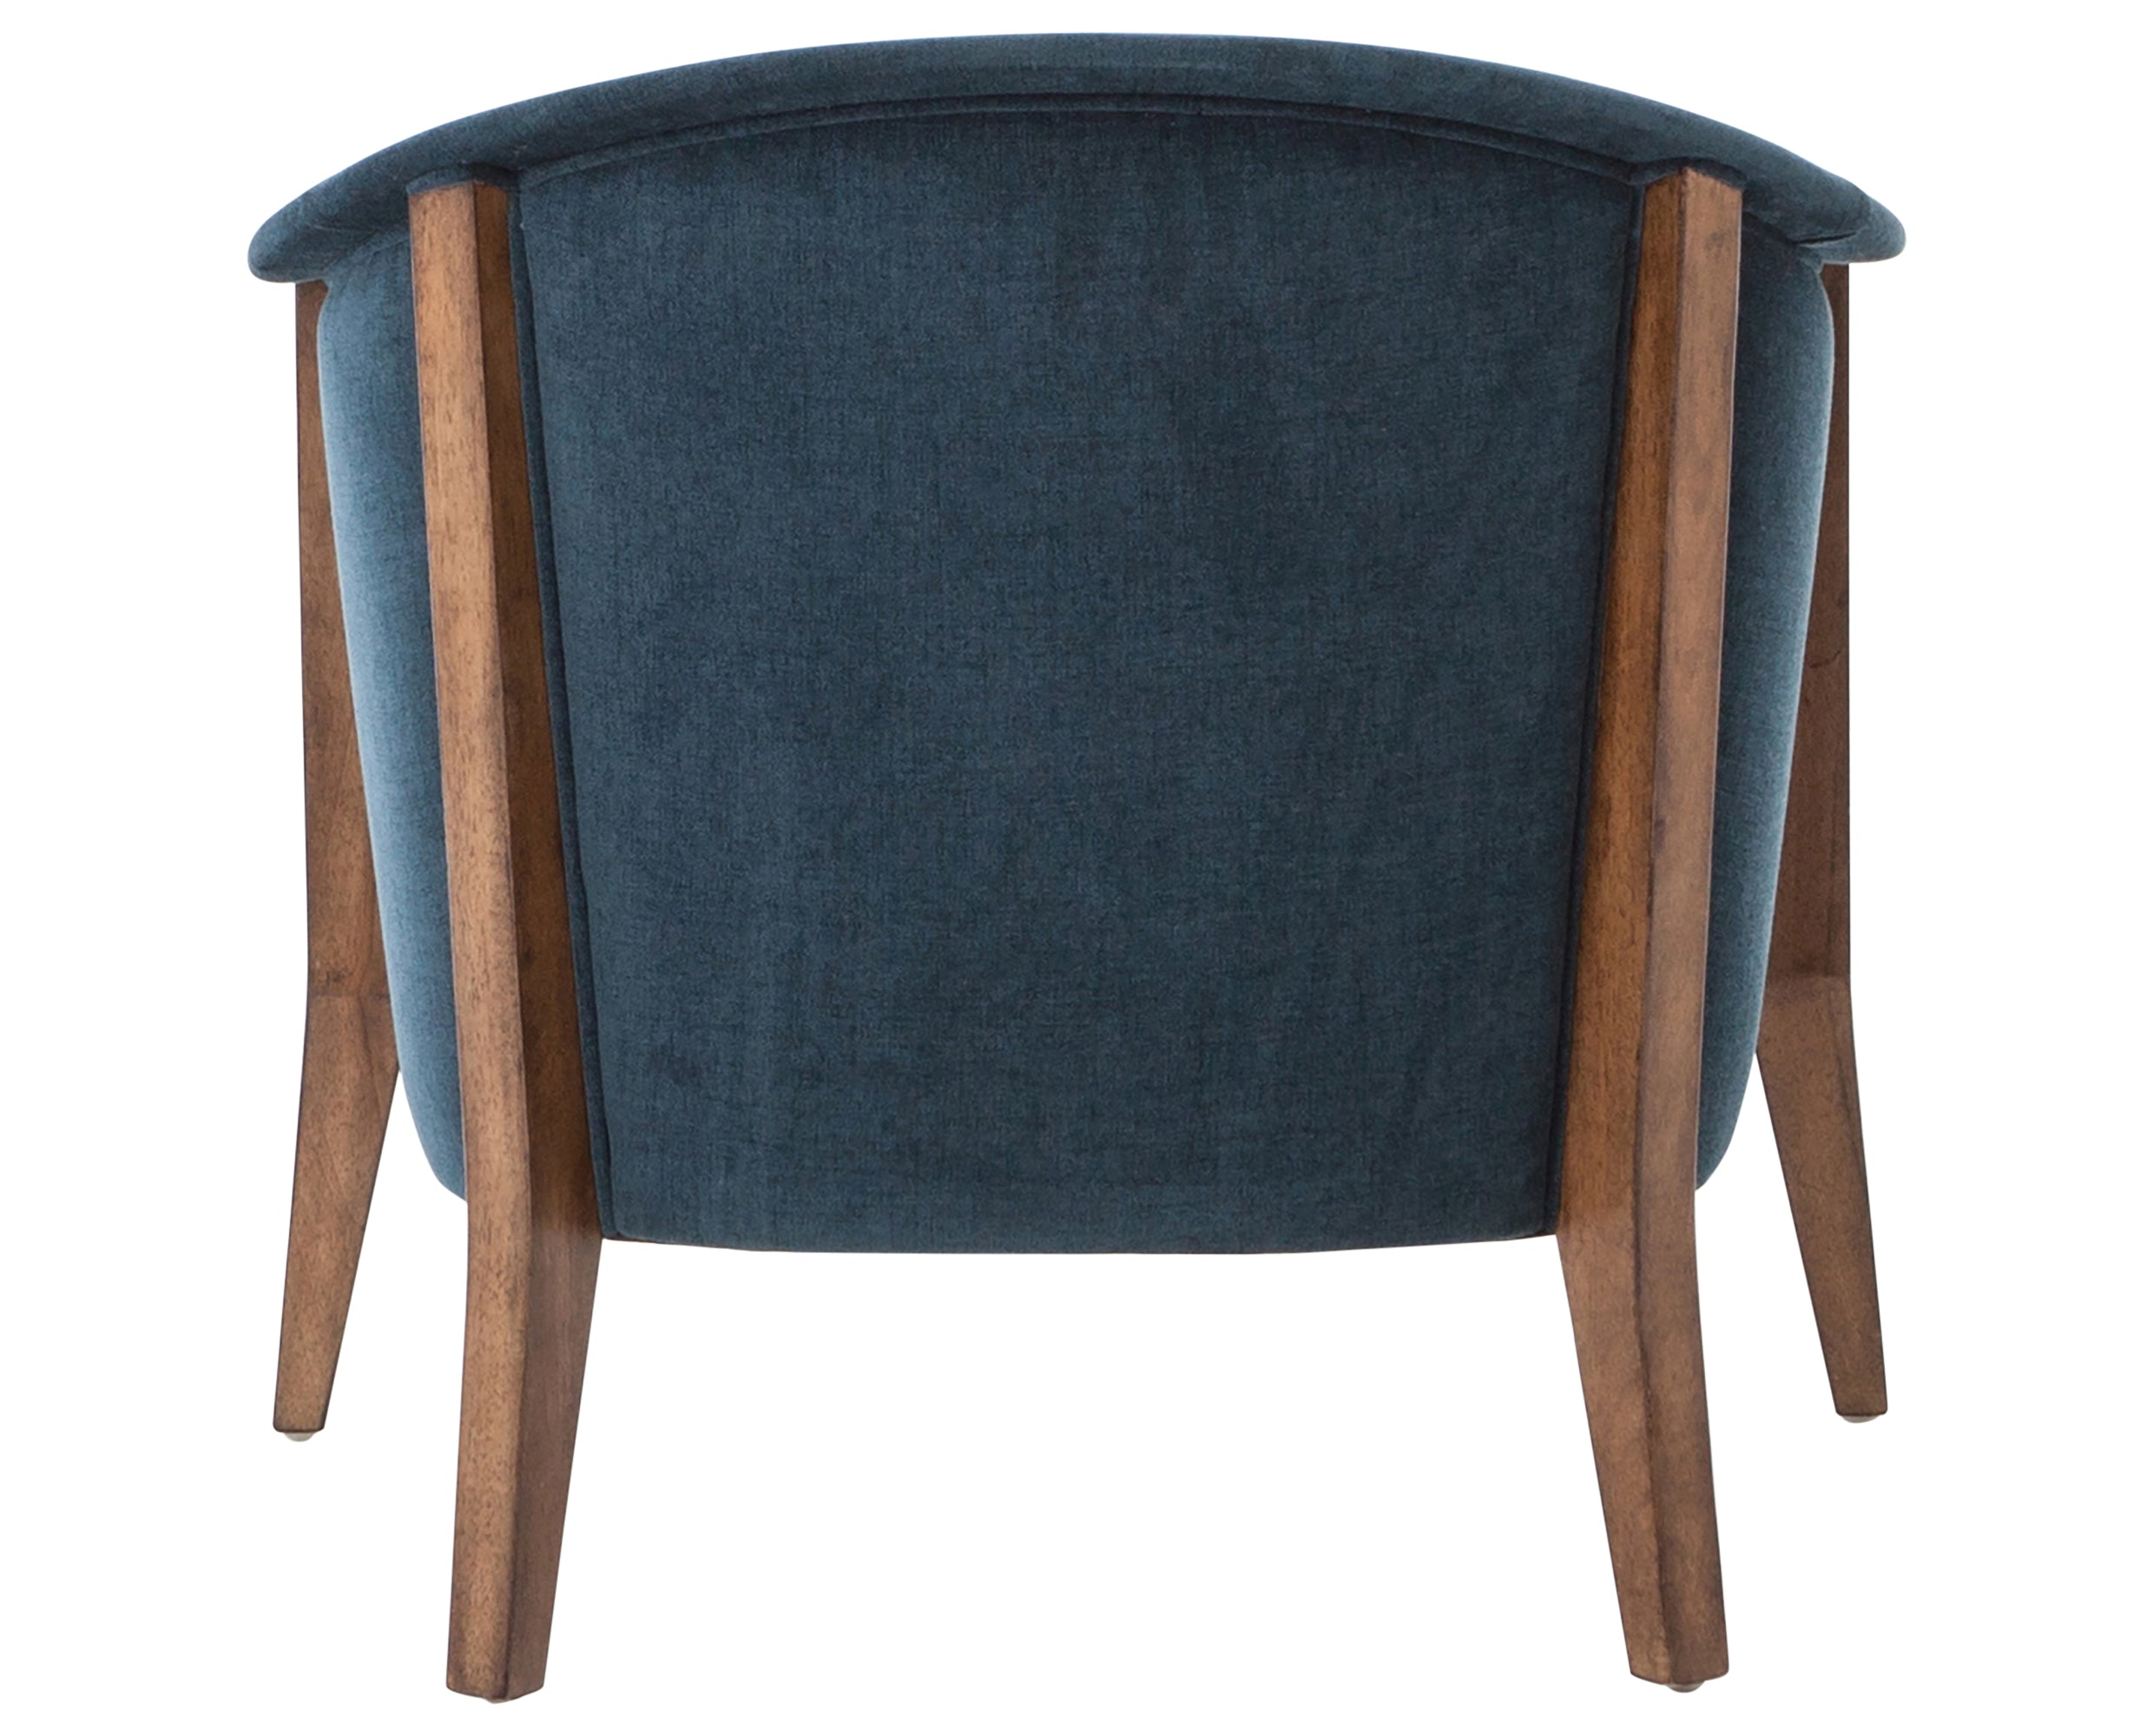 Plush Azure Fabric with Antique Cocoa Parawood | Nomad Chair | Valley Ridge Furniture